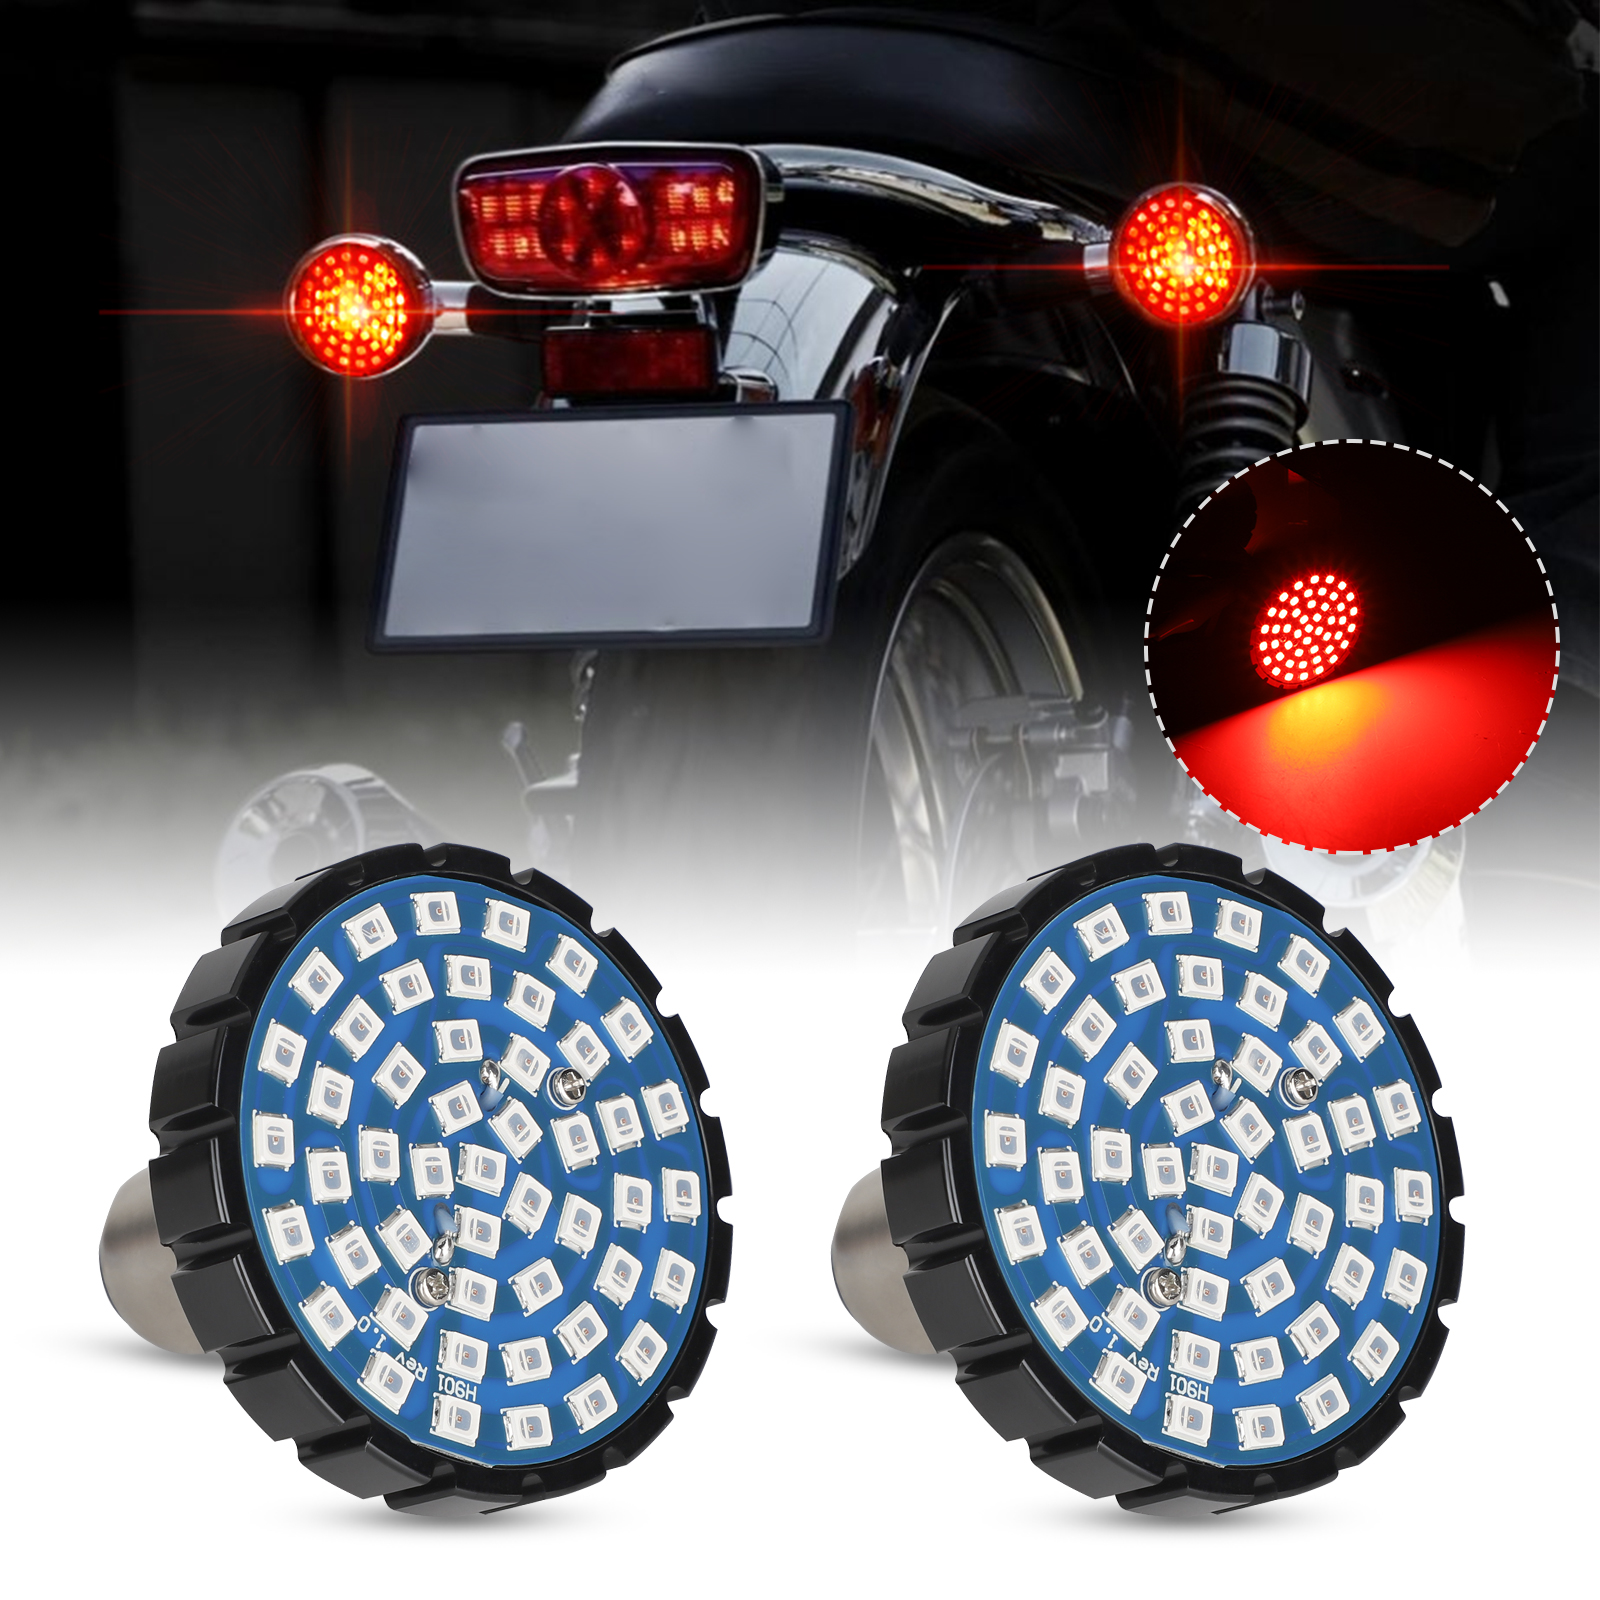 AstraDepot Reflector Replacement Compatible with 2020 2021 Toyota Highlander Add-on RED LED Brake Running Light Tail Lamp Sequential Flash Turn Signal Lights